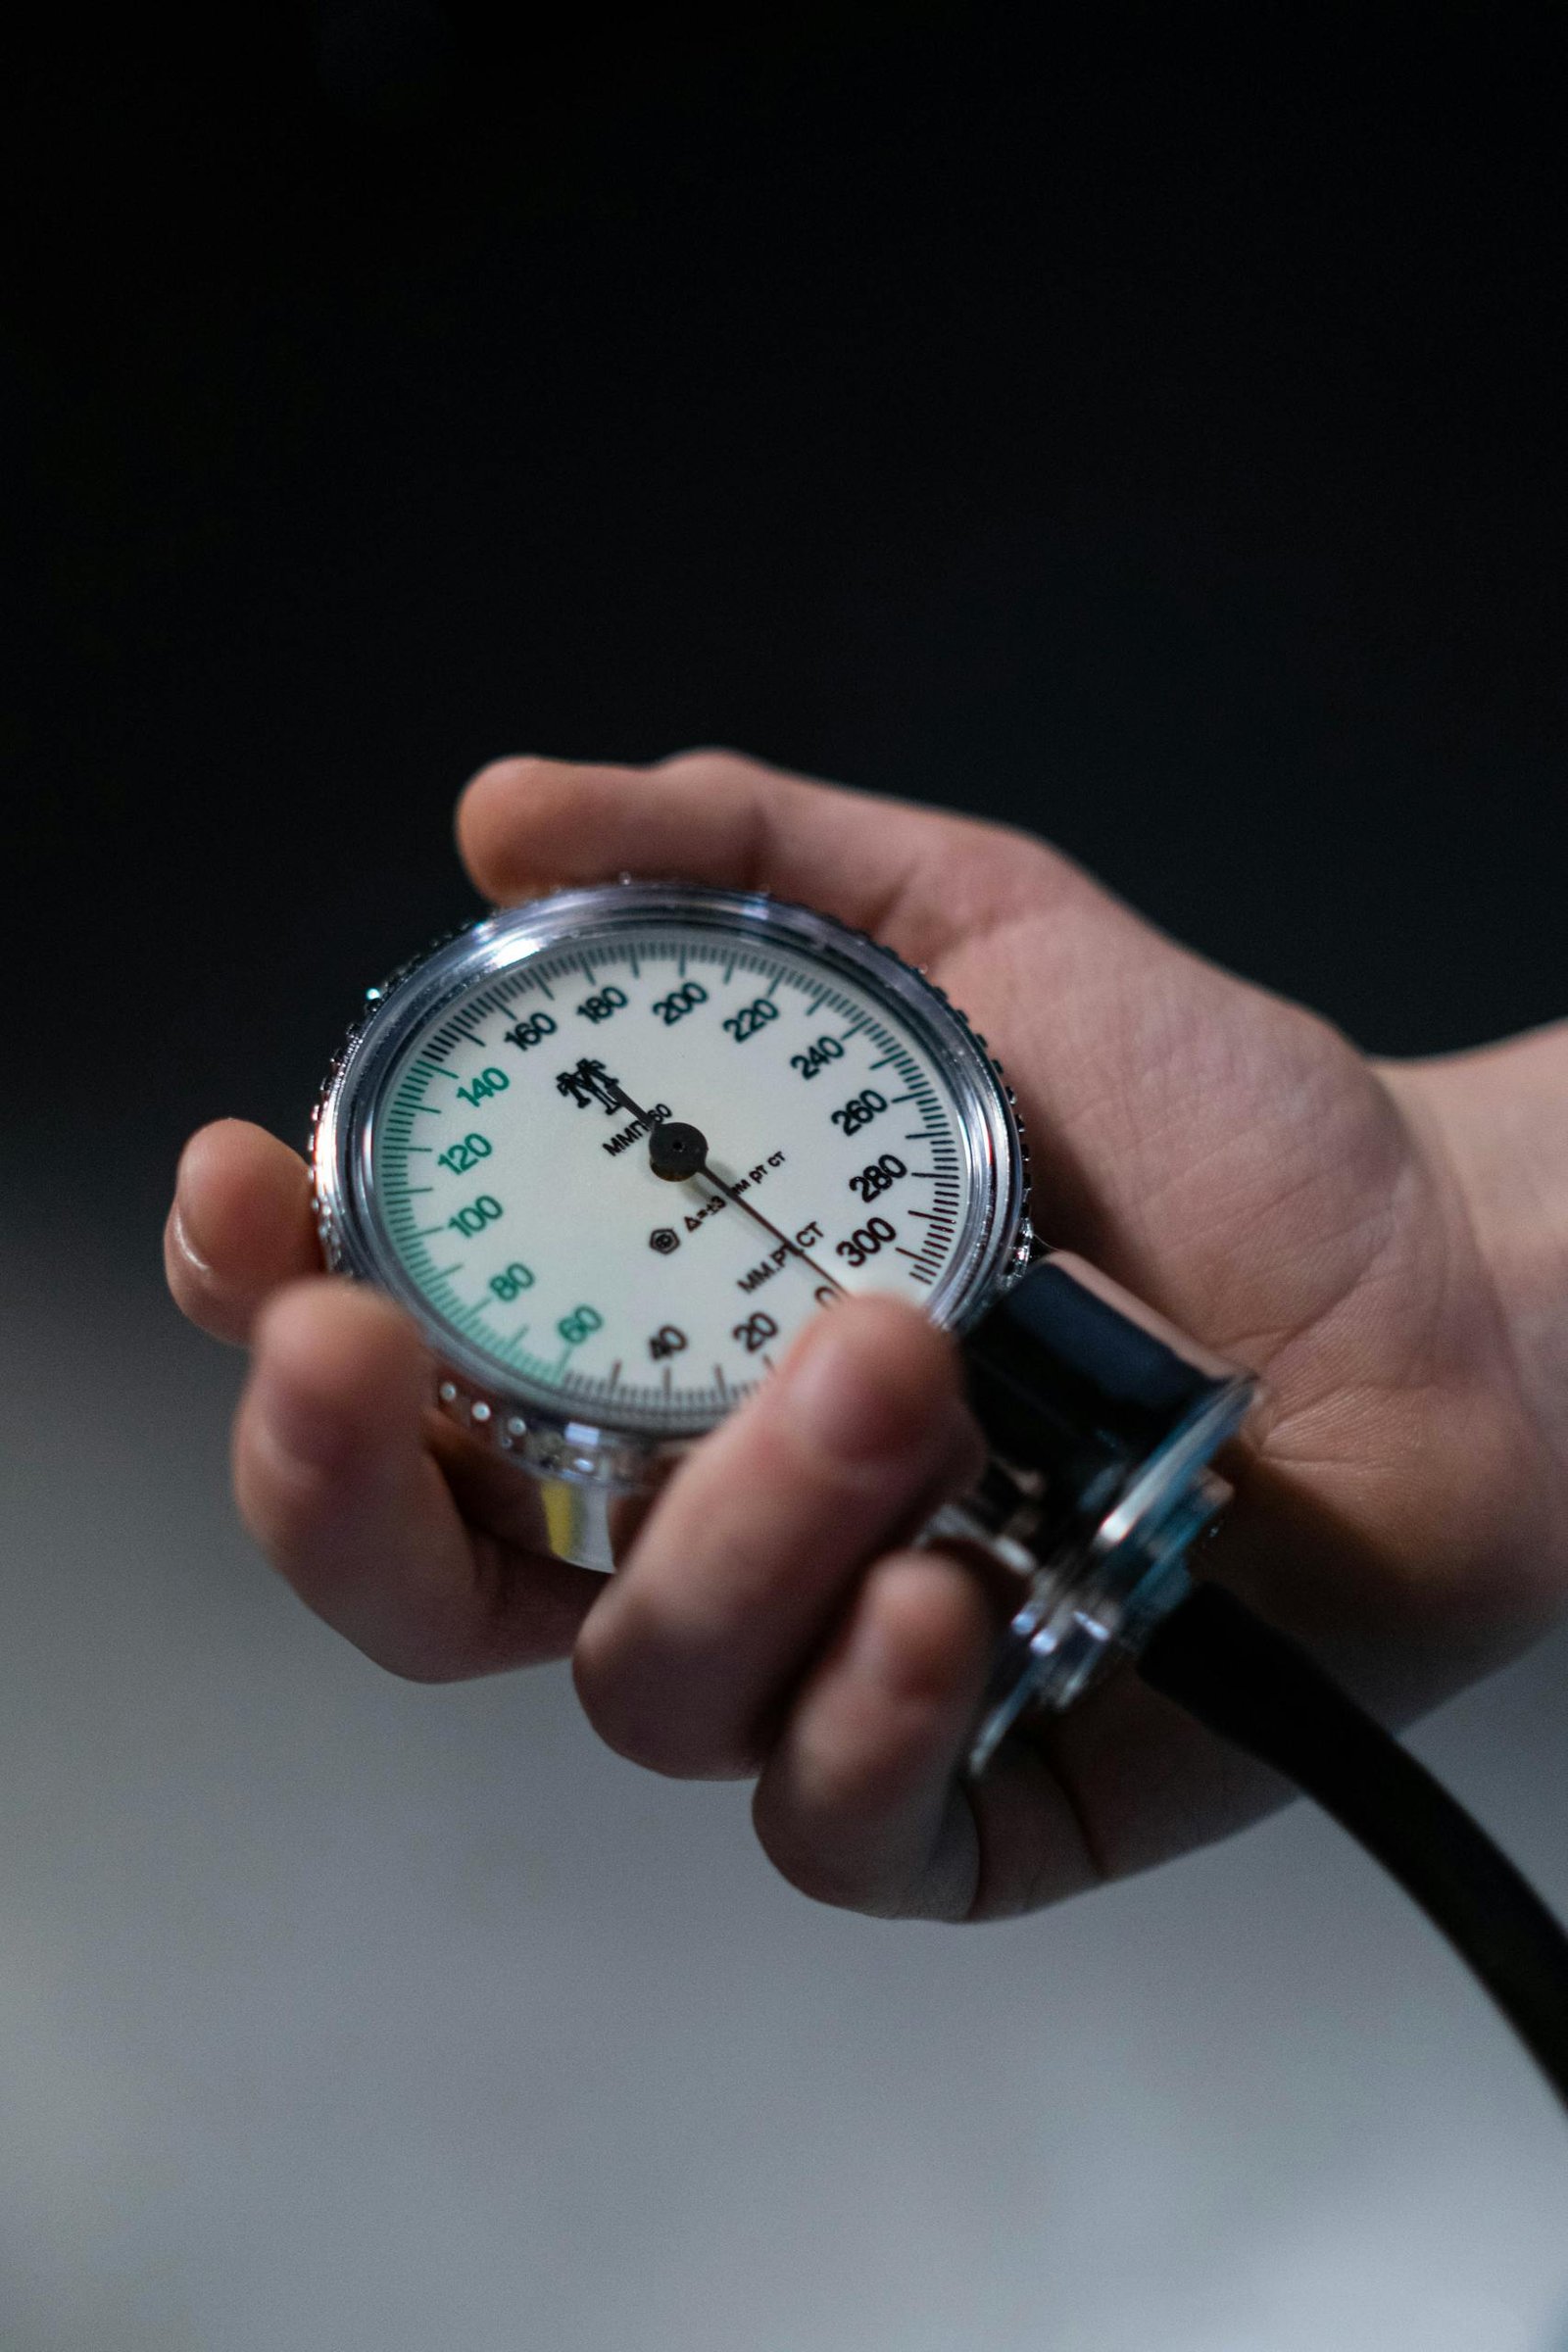 Close-Up Photo of a Person Holding a Sphygmomanometer Gauge